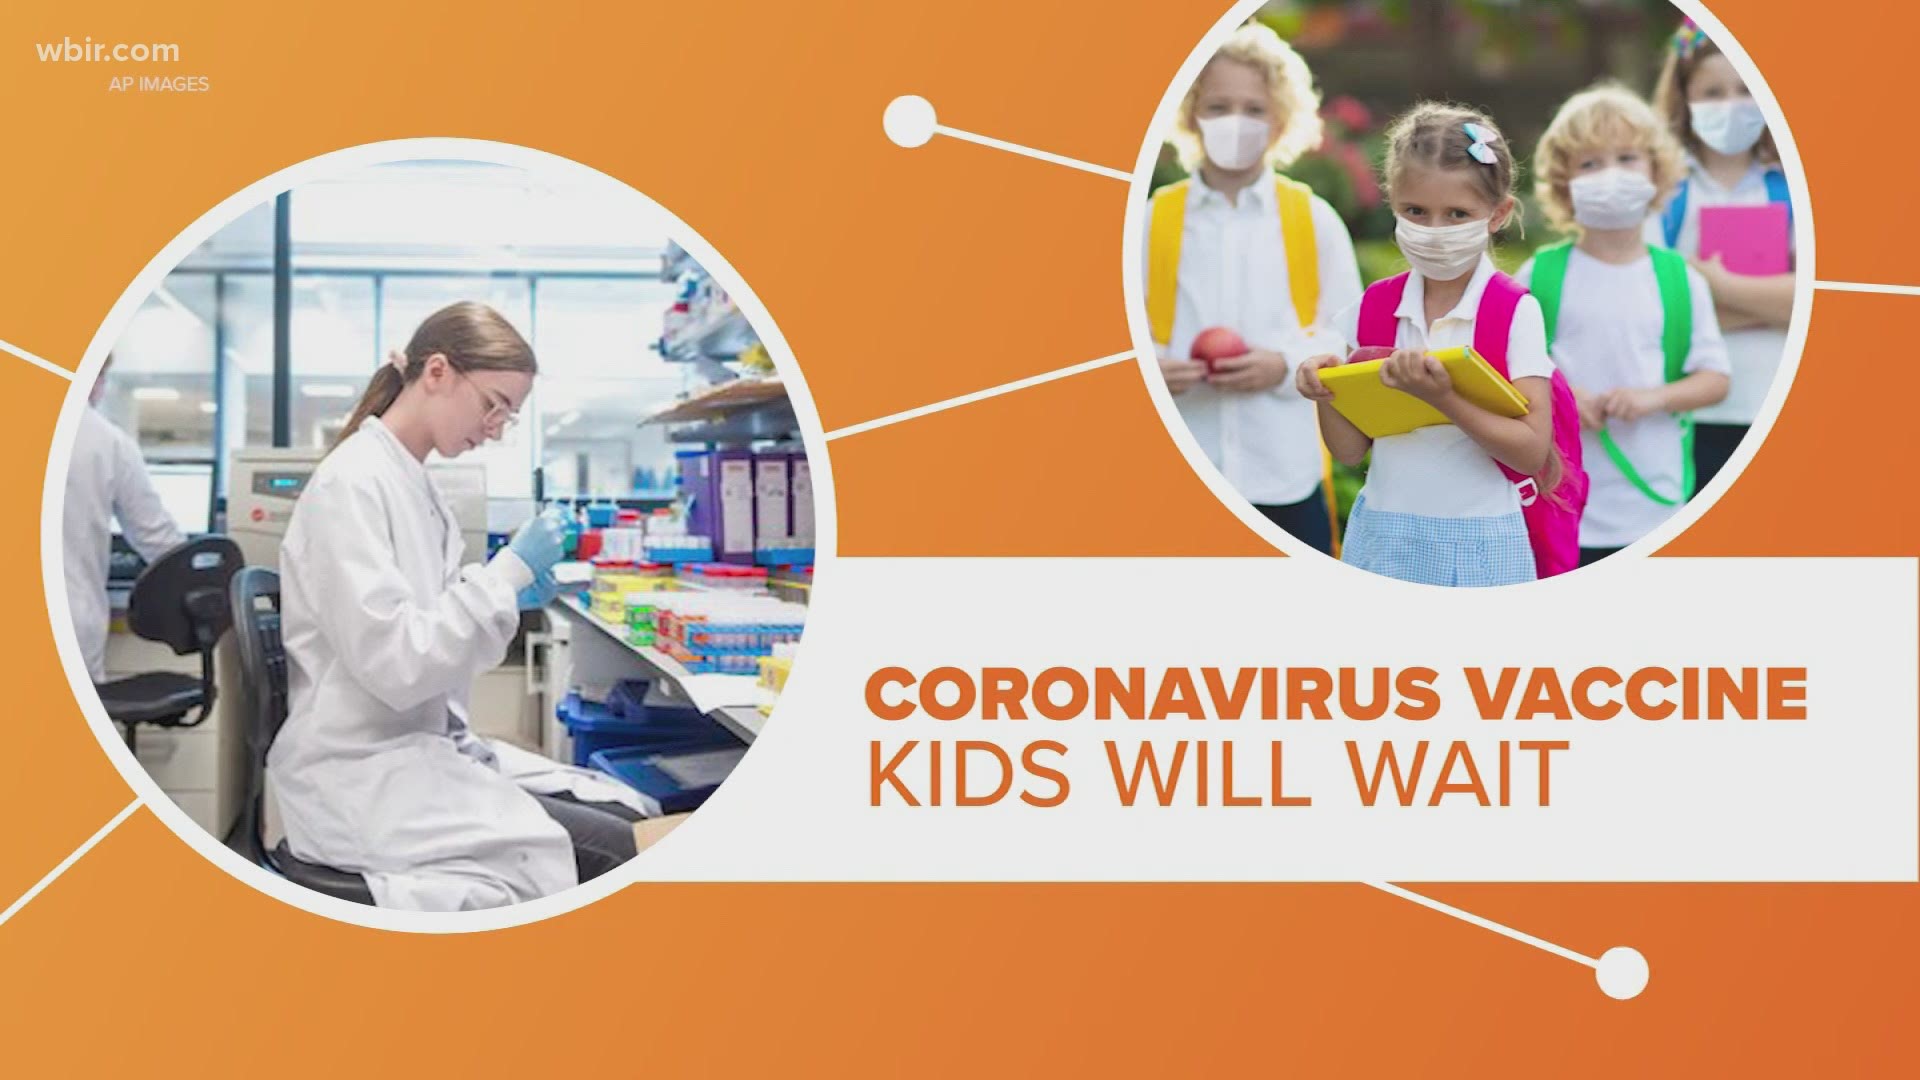 While a lot of us watch and wait for a coronavirus vaccine, a new report says our kids may have to wait even longer.